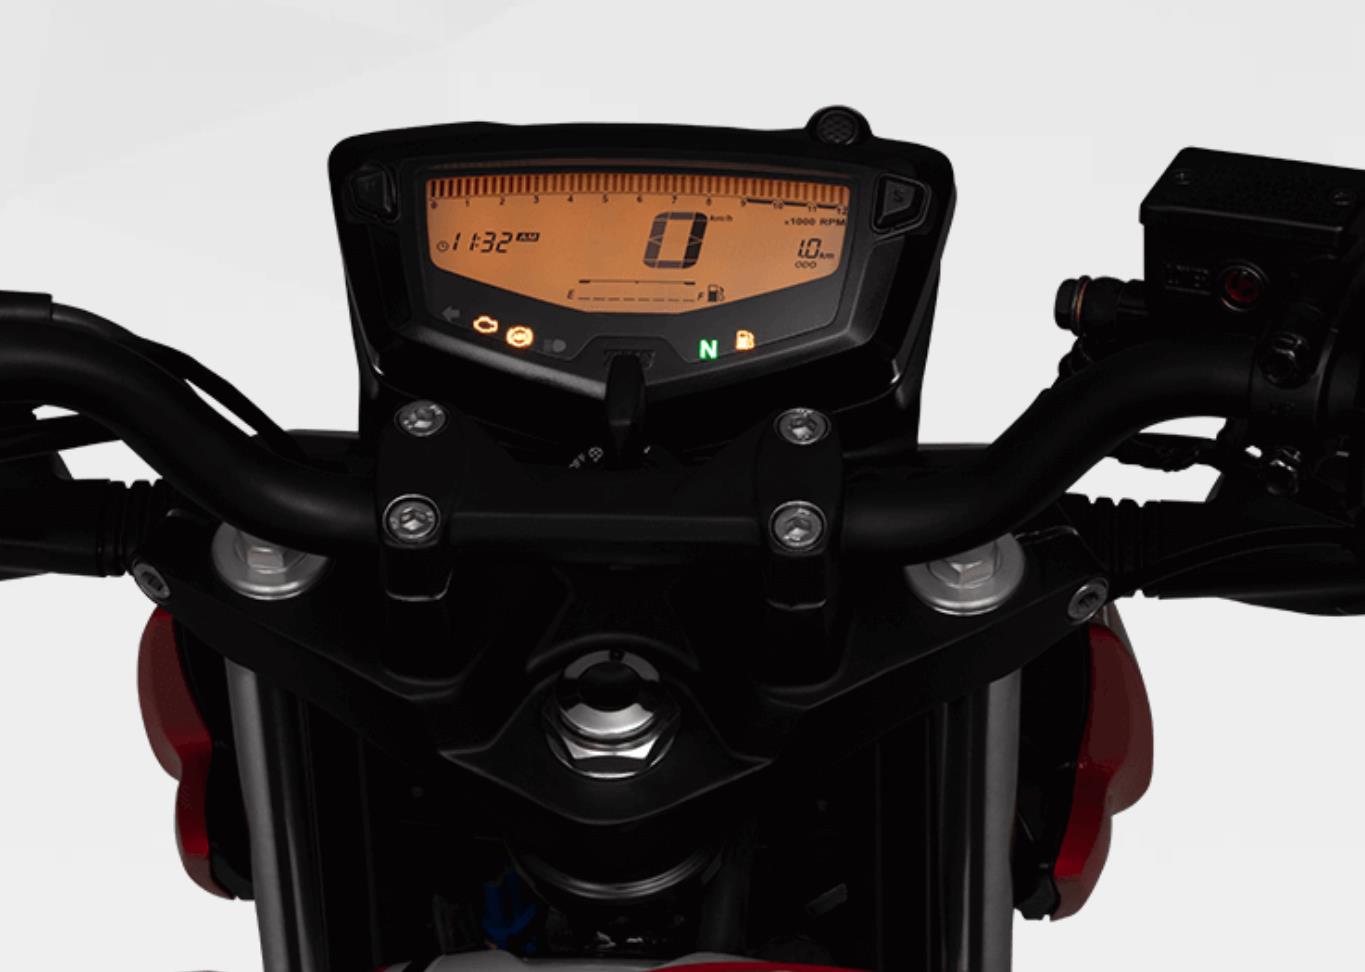 21 Tvs Apache Rtr 160 4v Price Top Speed Mileage In India